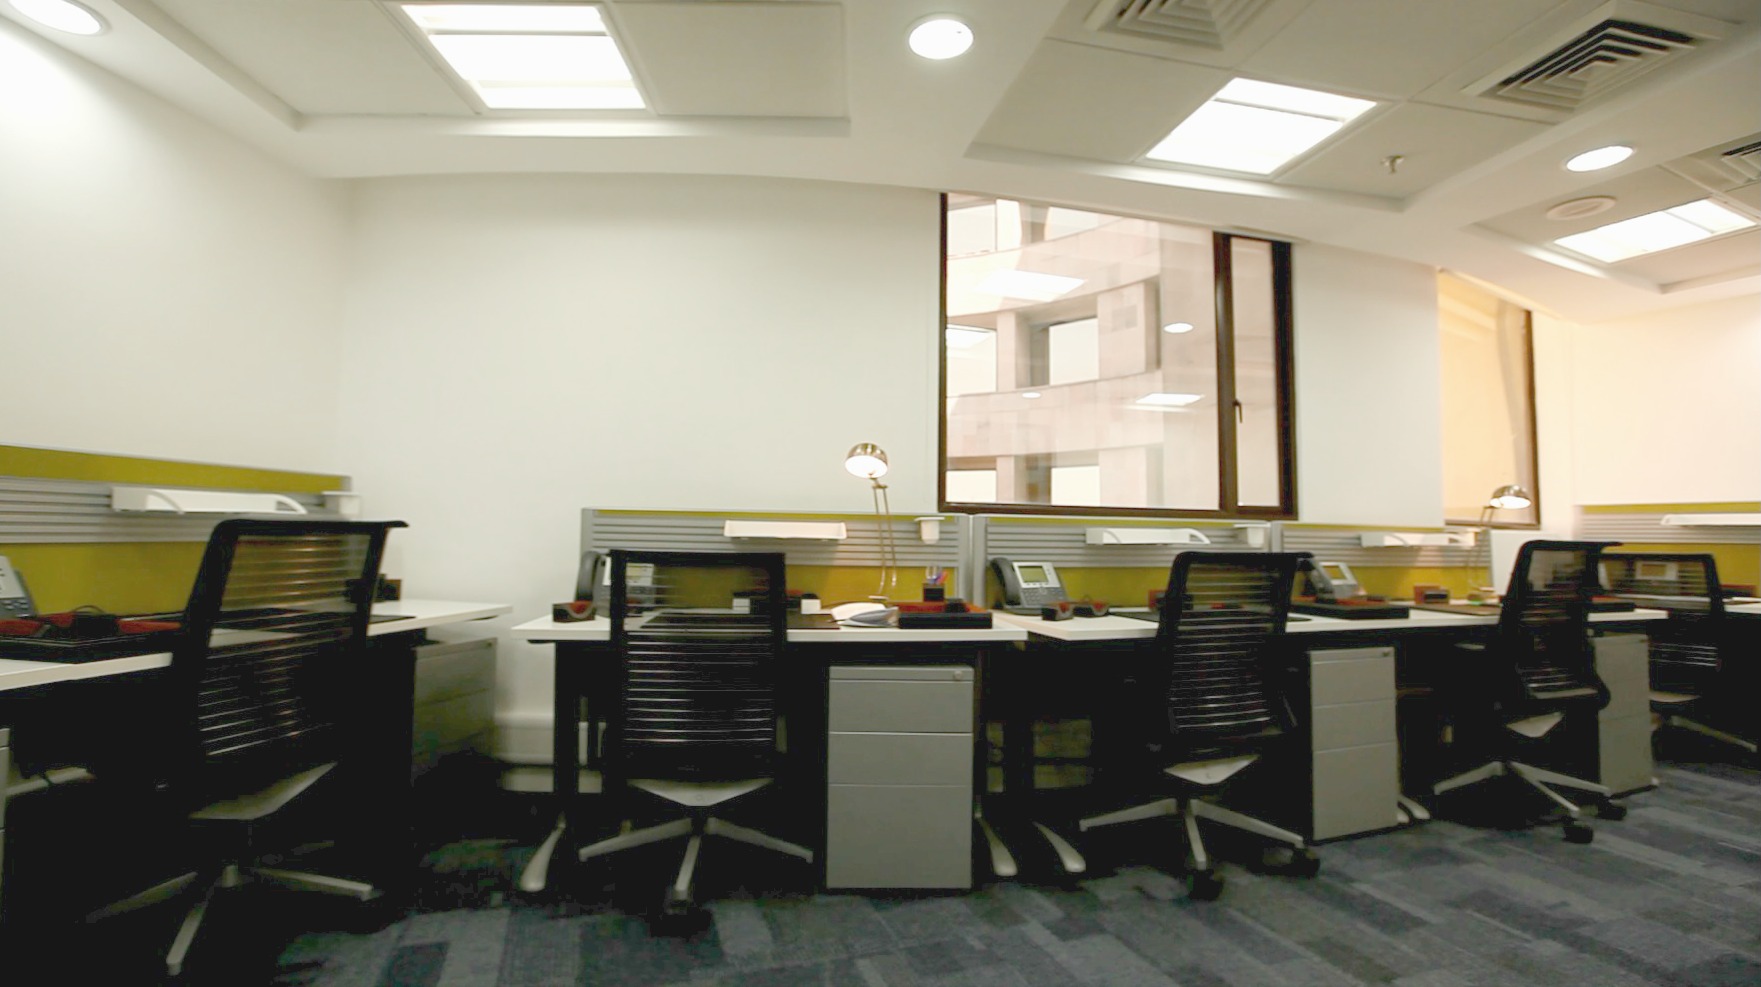 5 Step Checklist to View an Office Space